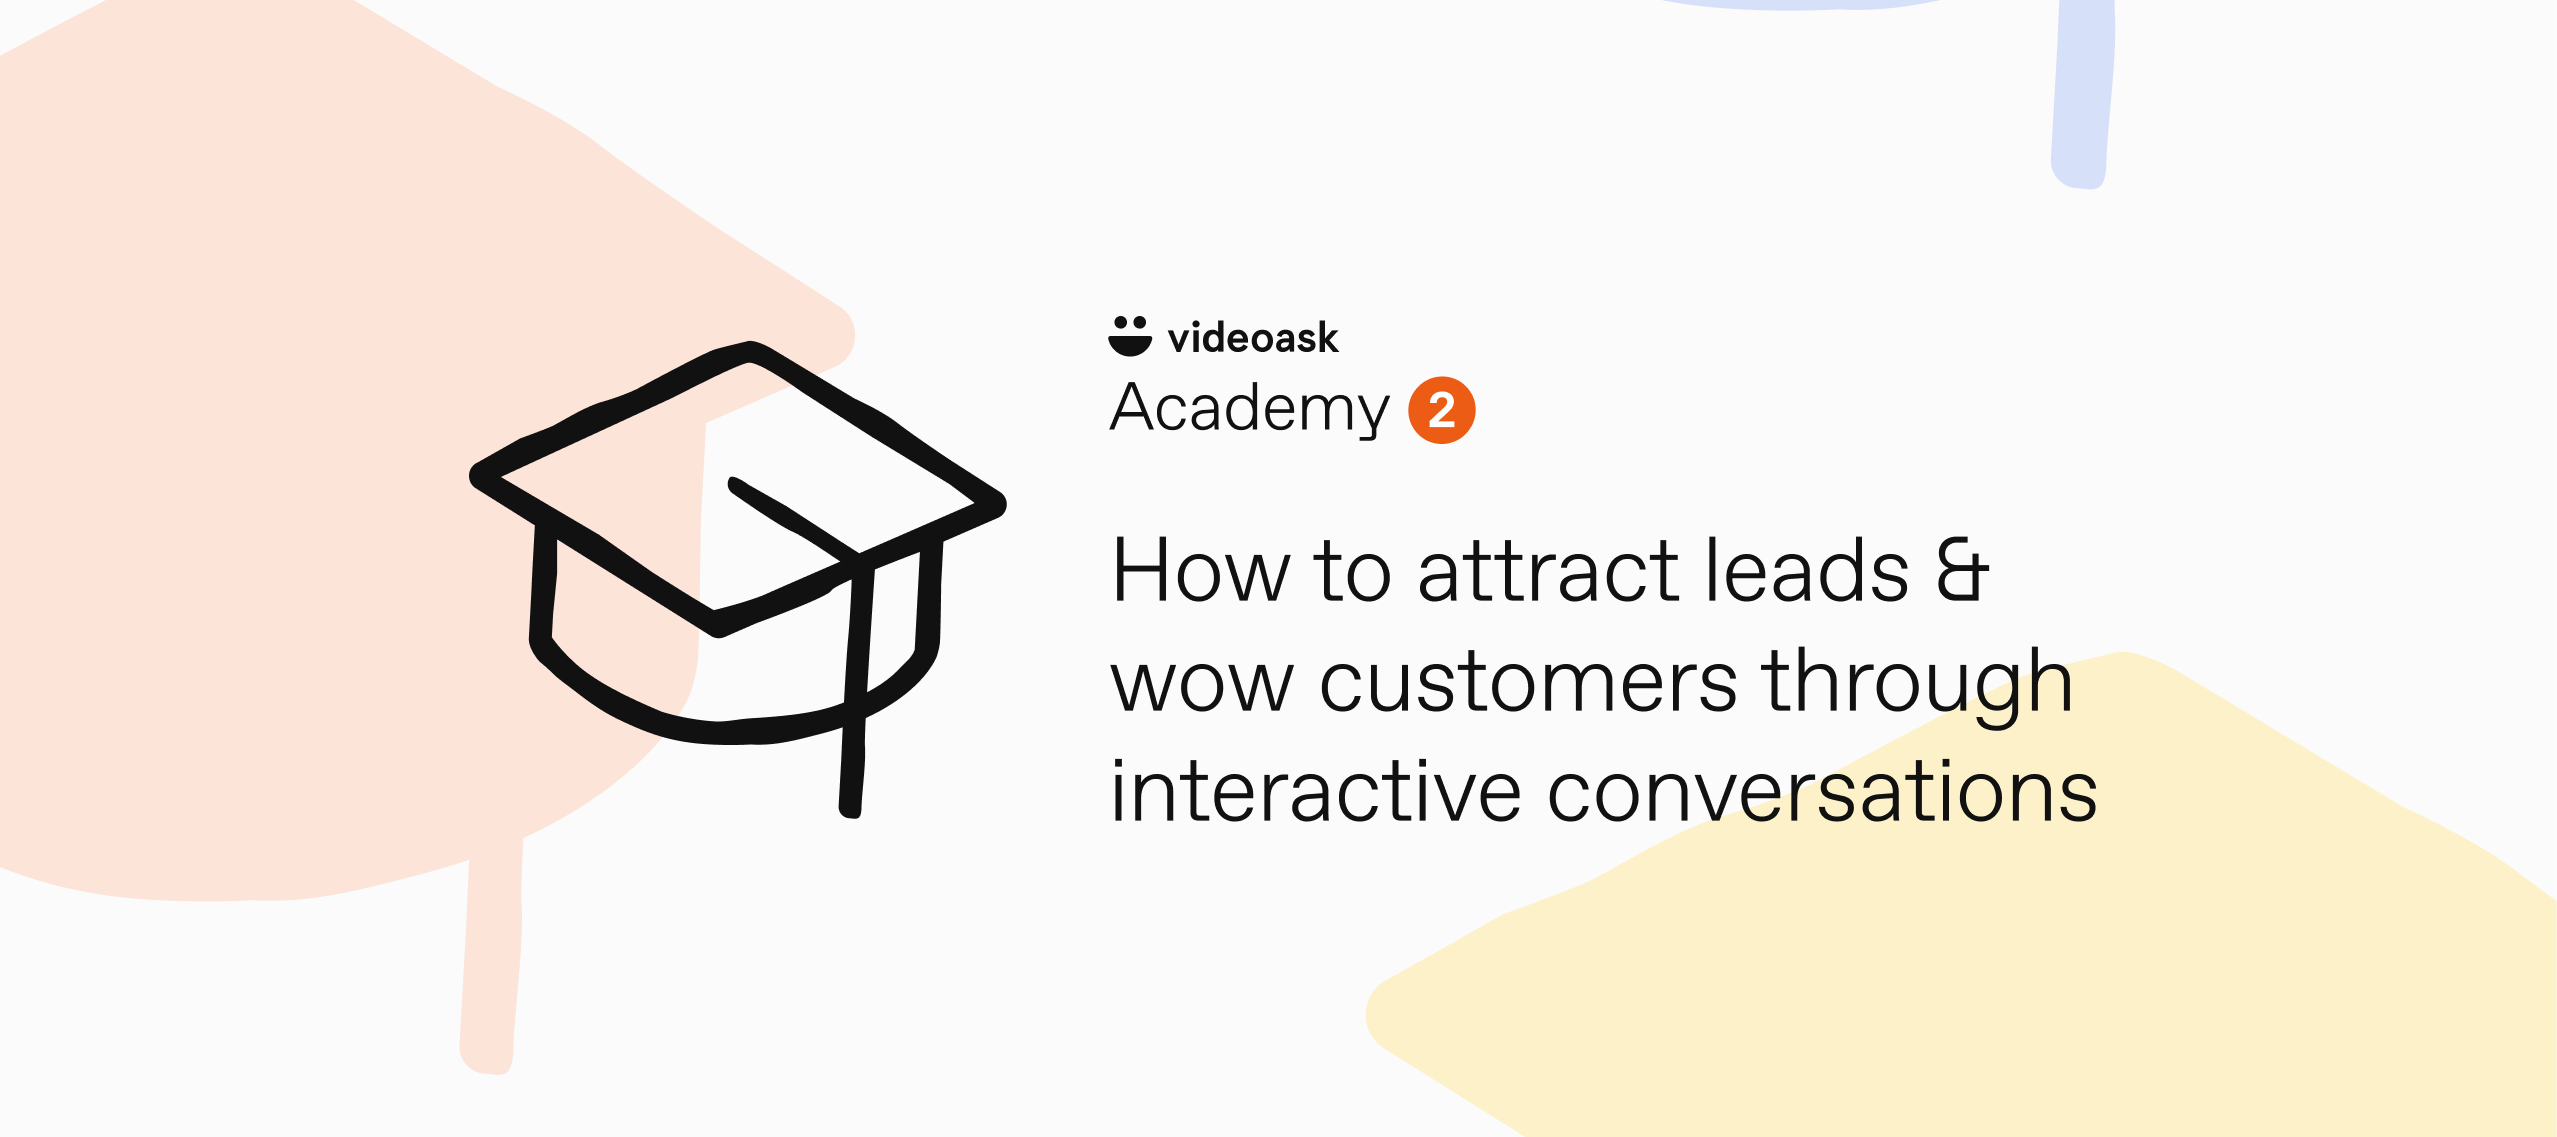 ⏯️ Rewatch: VideoAsk Academy: How to attract leads & wow customers through interactive conversations 🎓